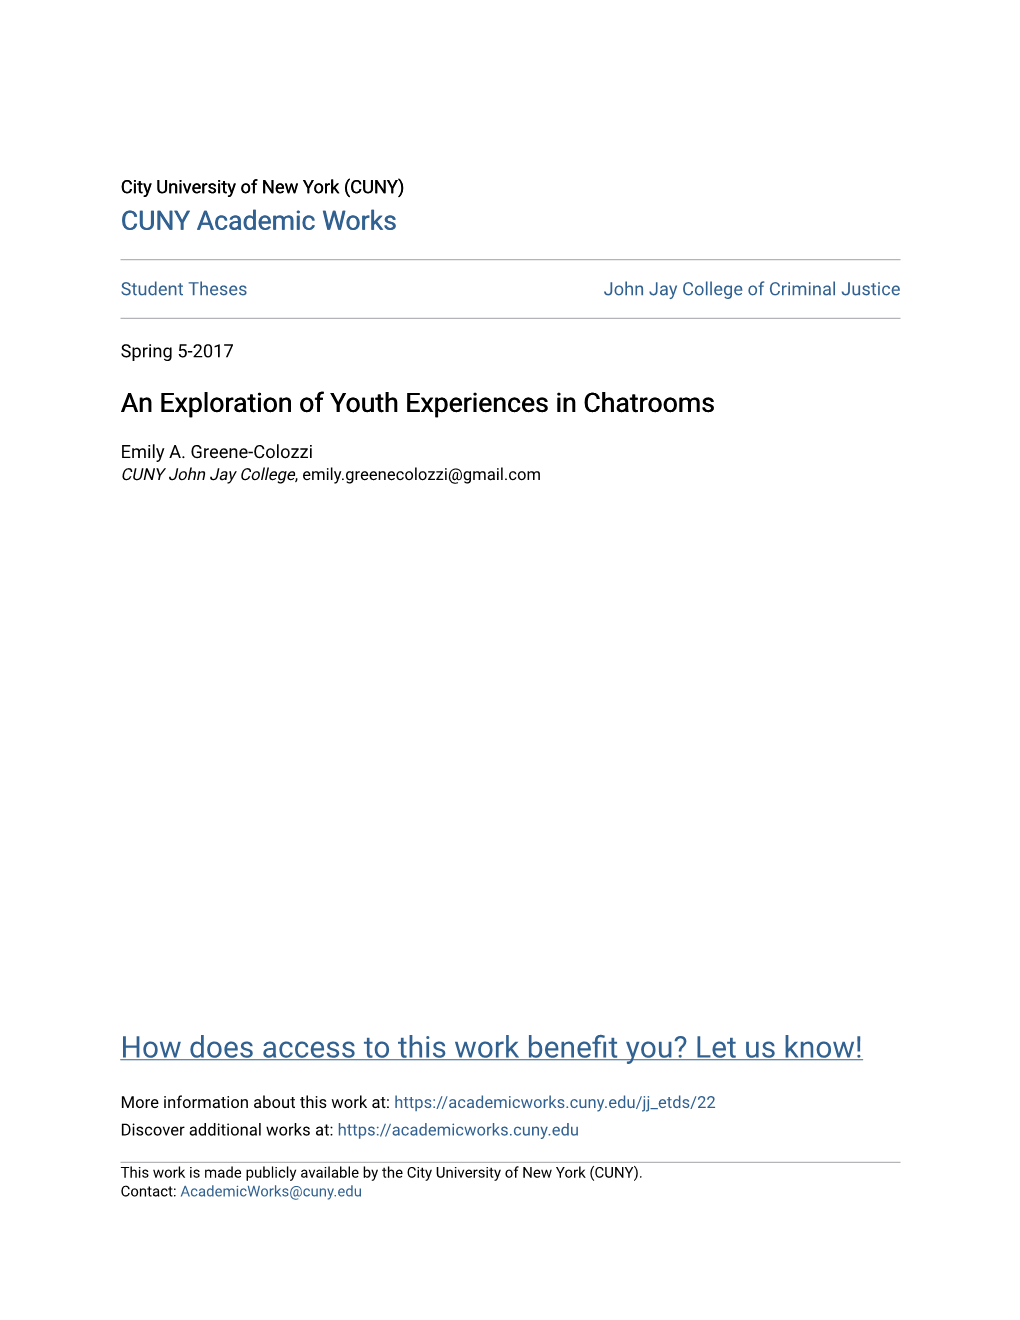 An Exploration of Youth Experiences in Chatrooms